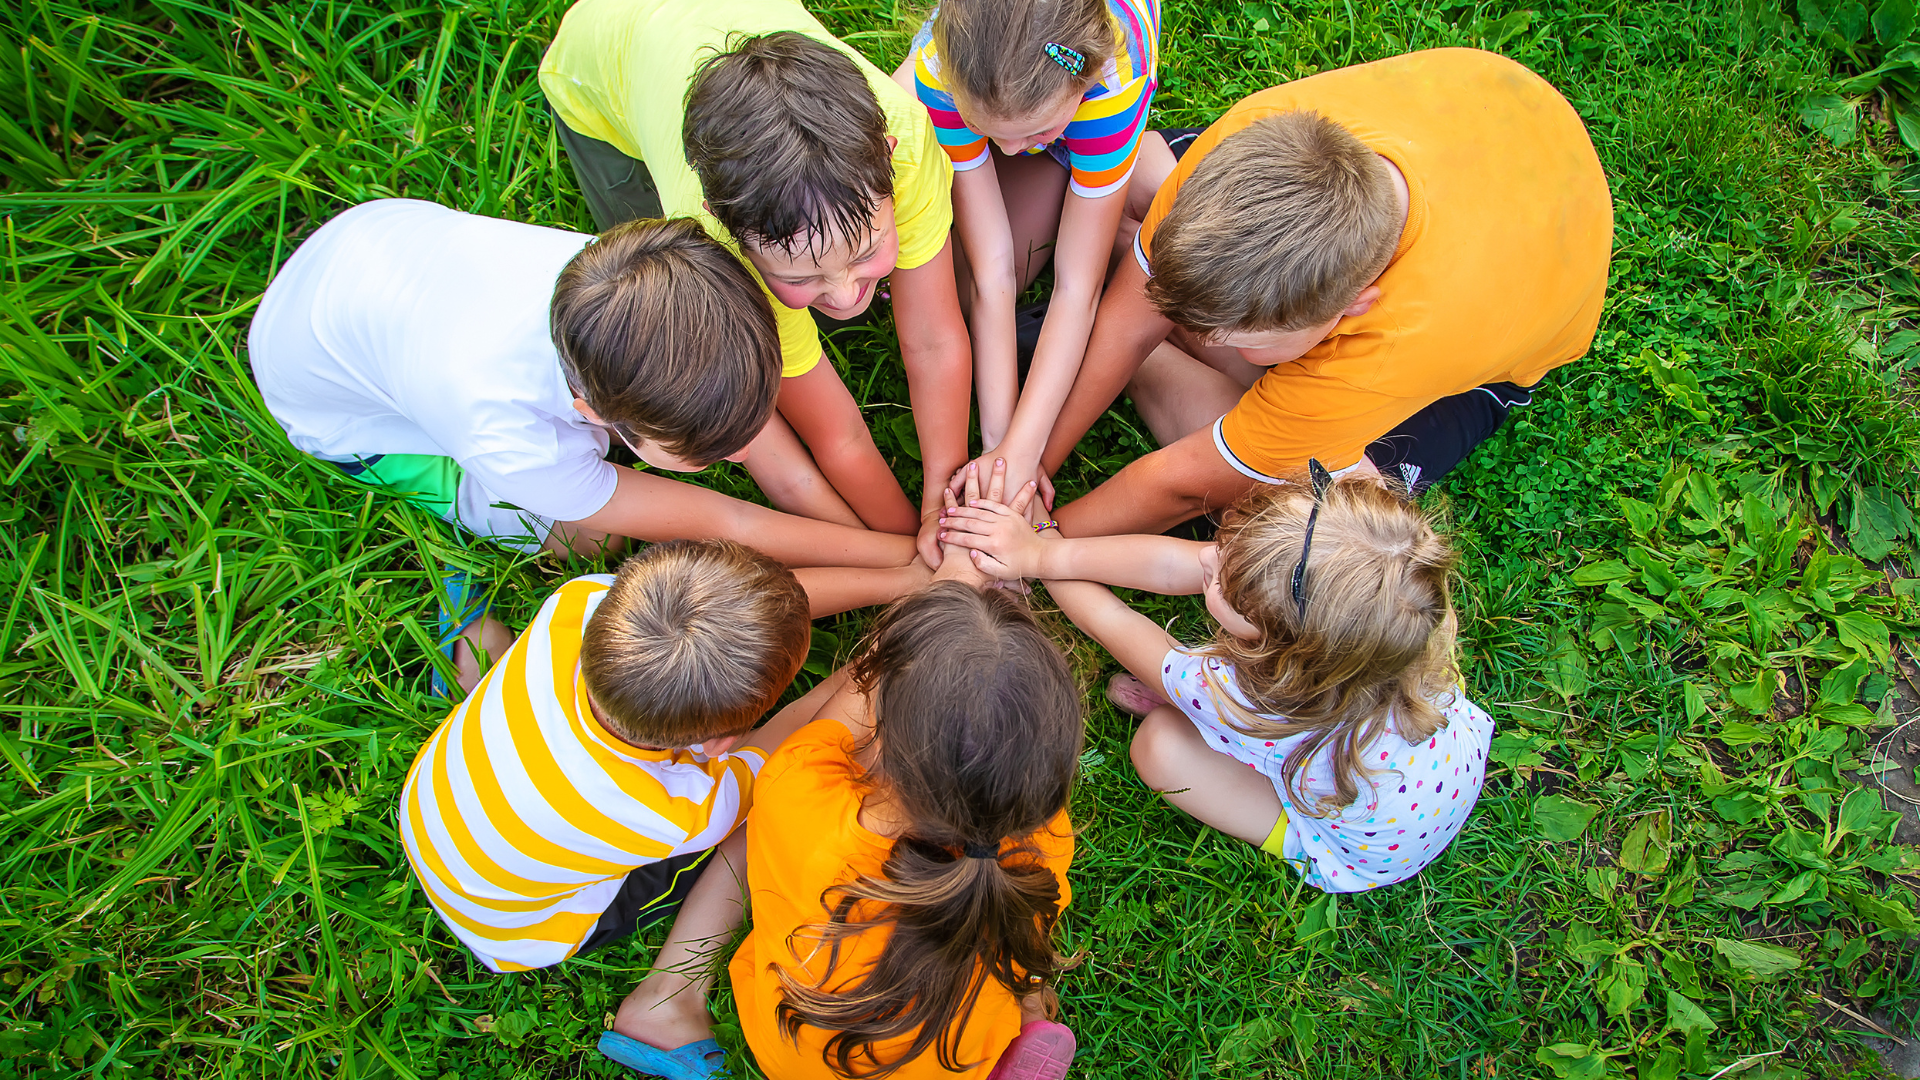 Seven children putting hands together in a circle sat on grass.